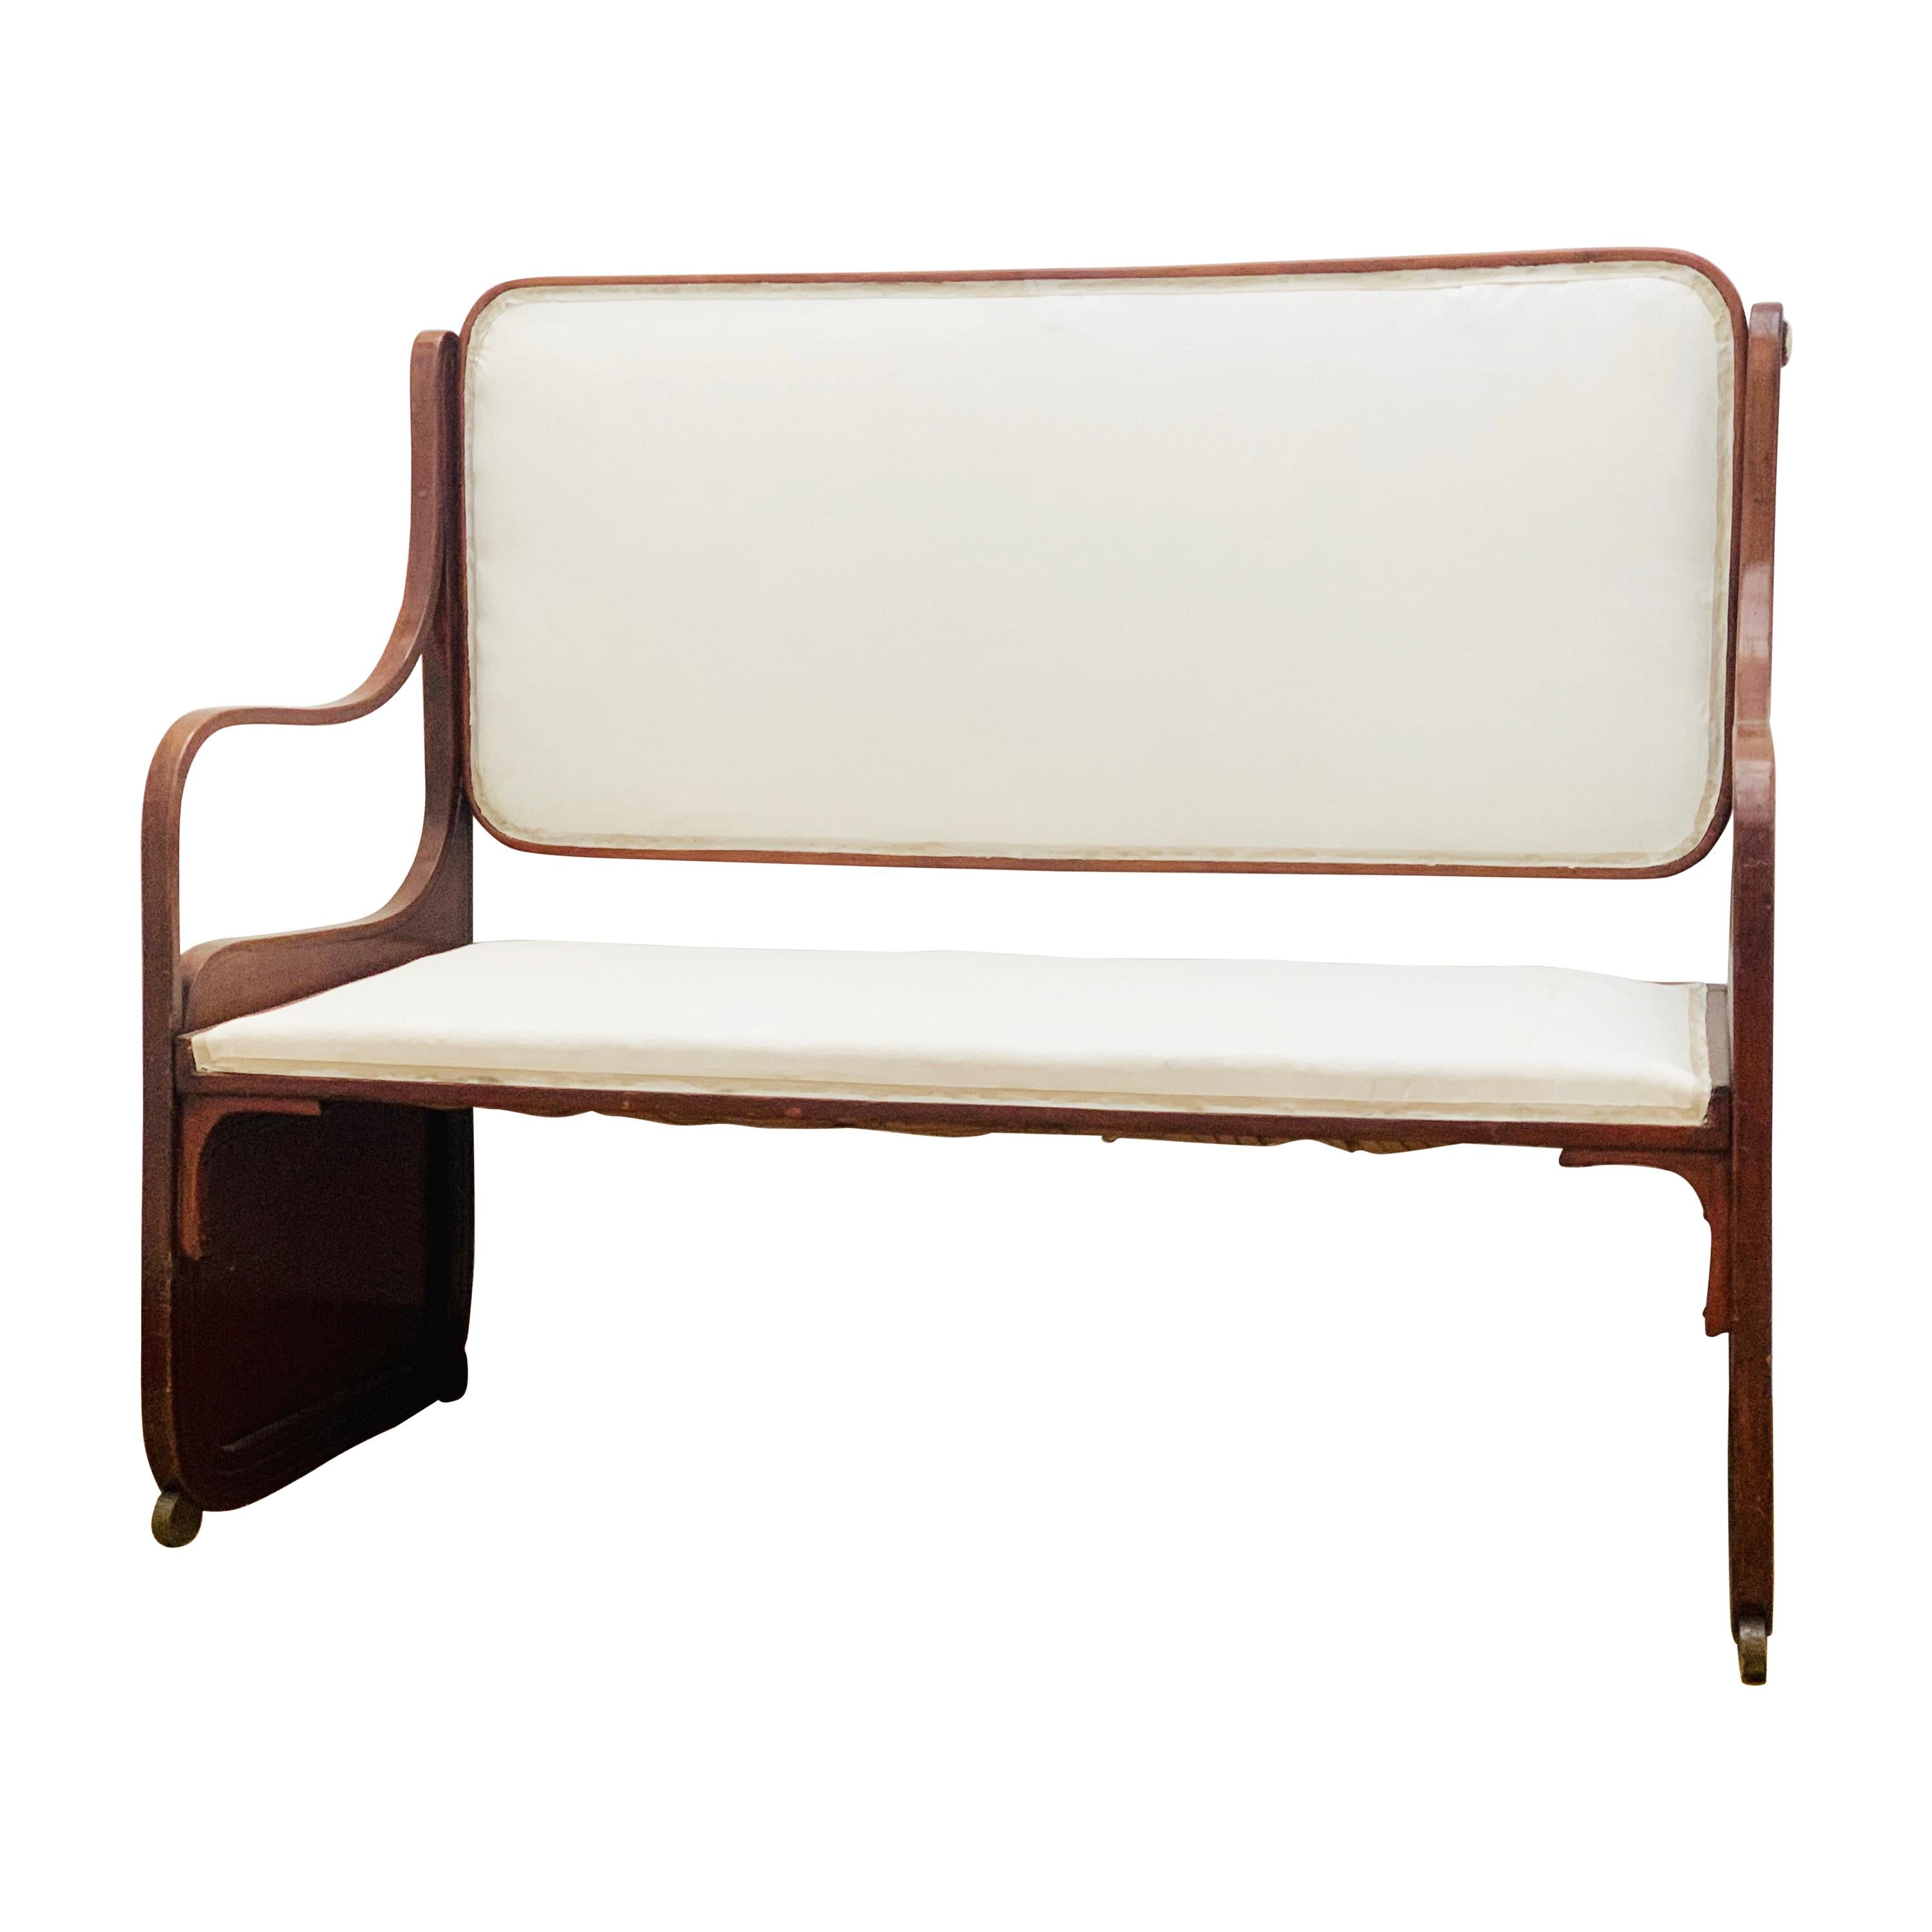 Bentwood Bench by Koloman Moser, Viennese Secession, circa 1900